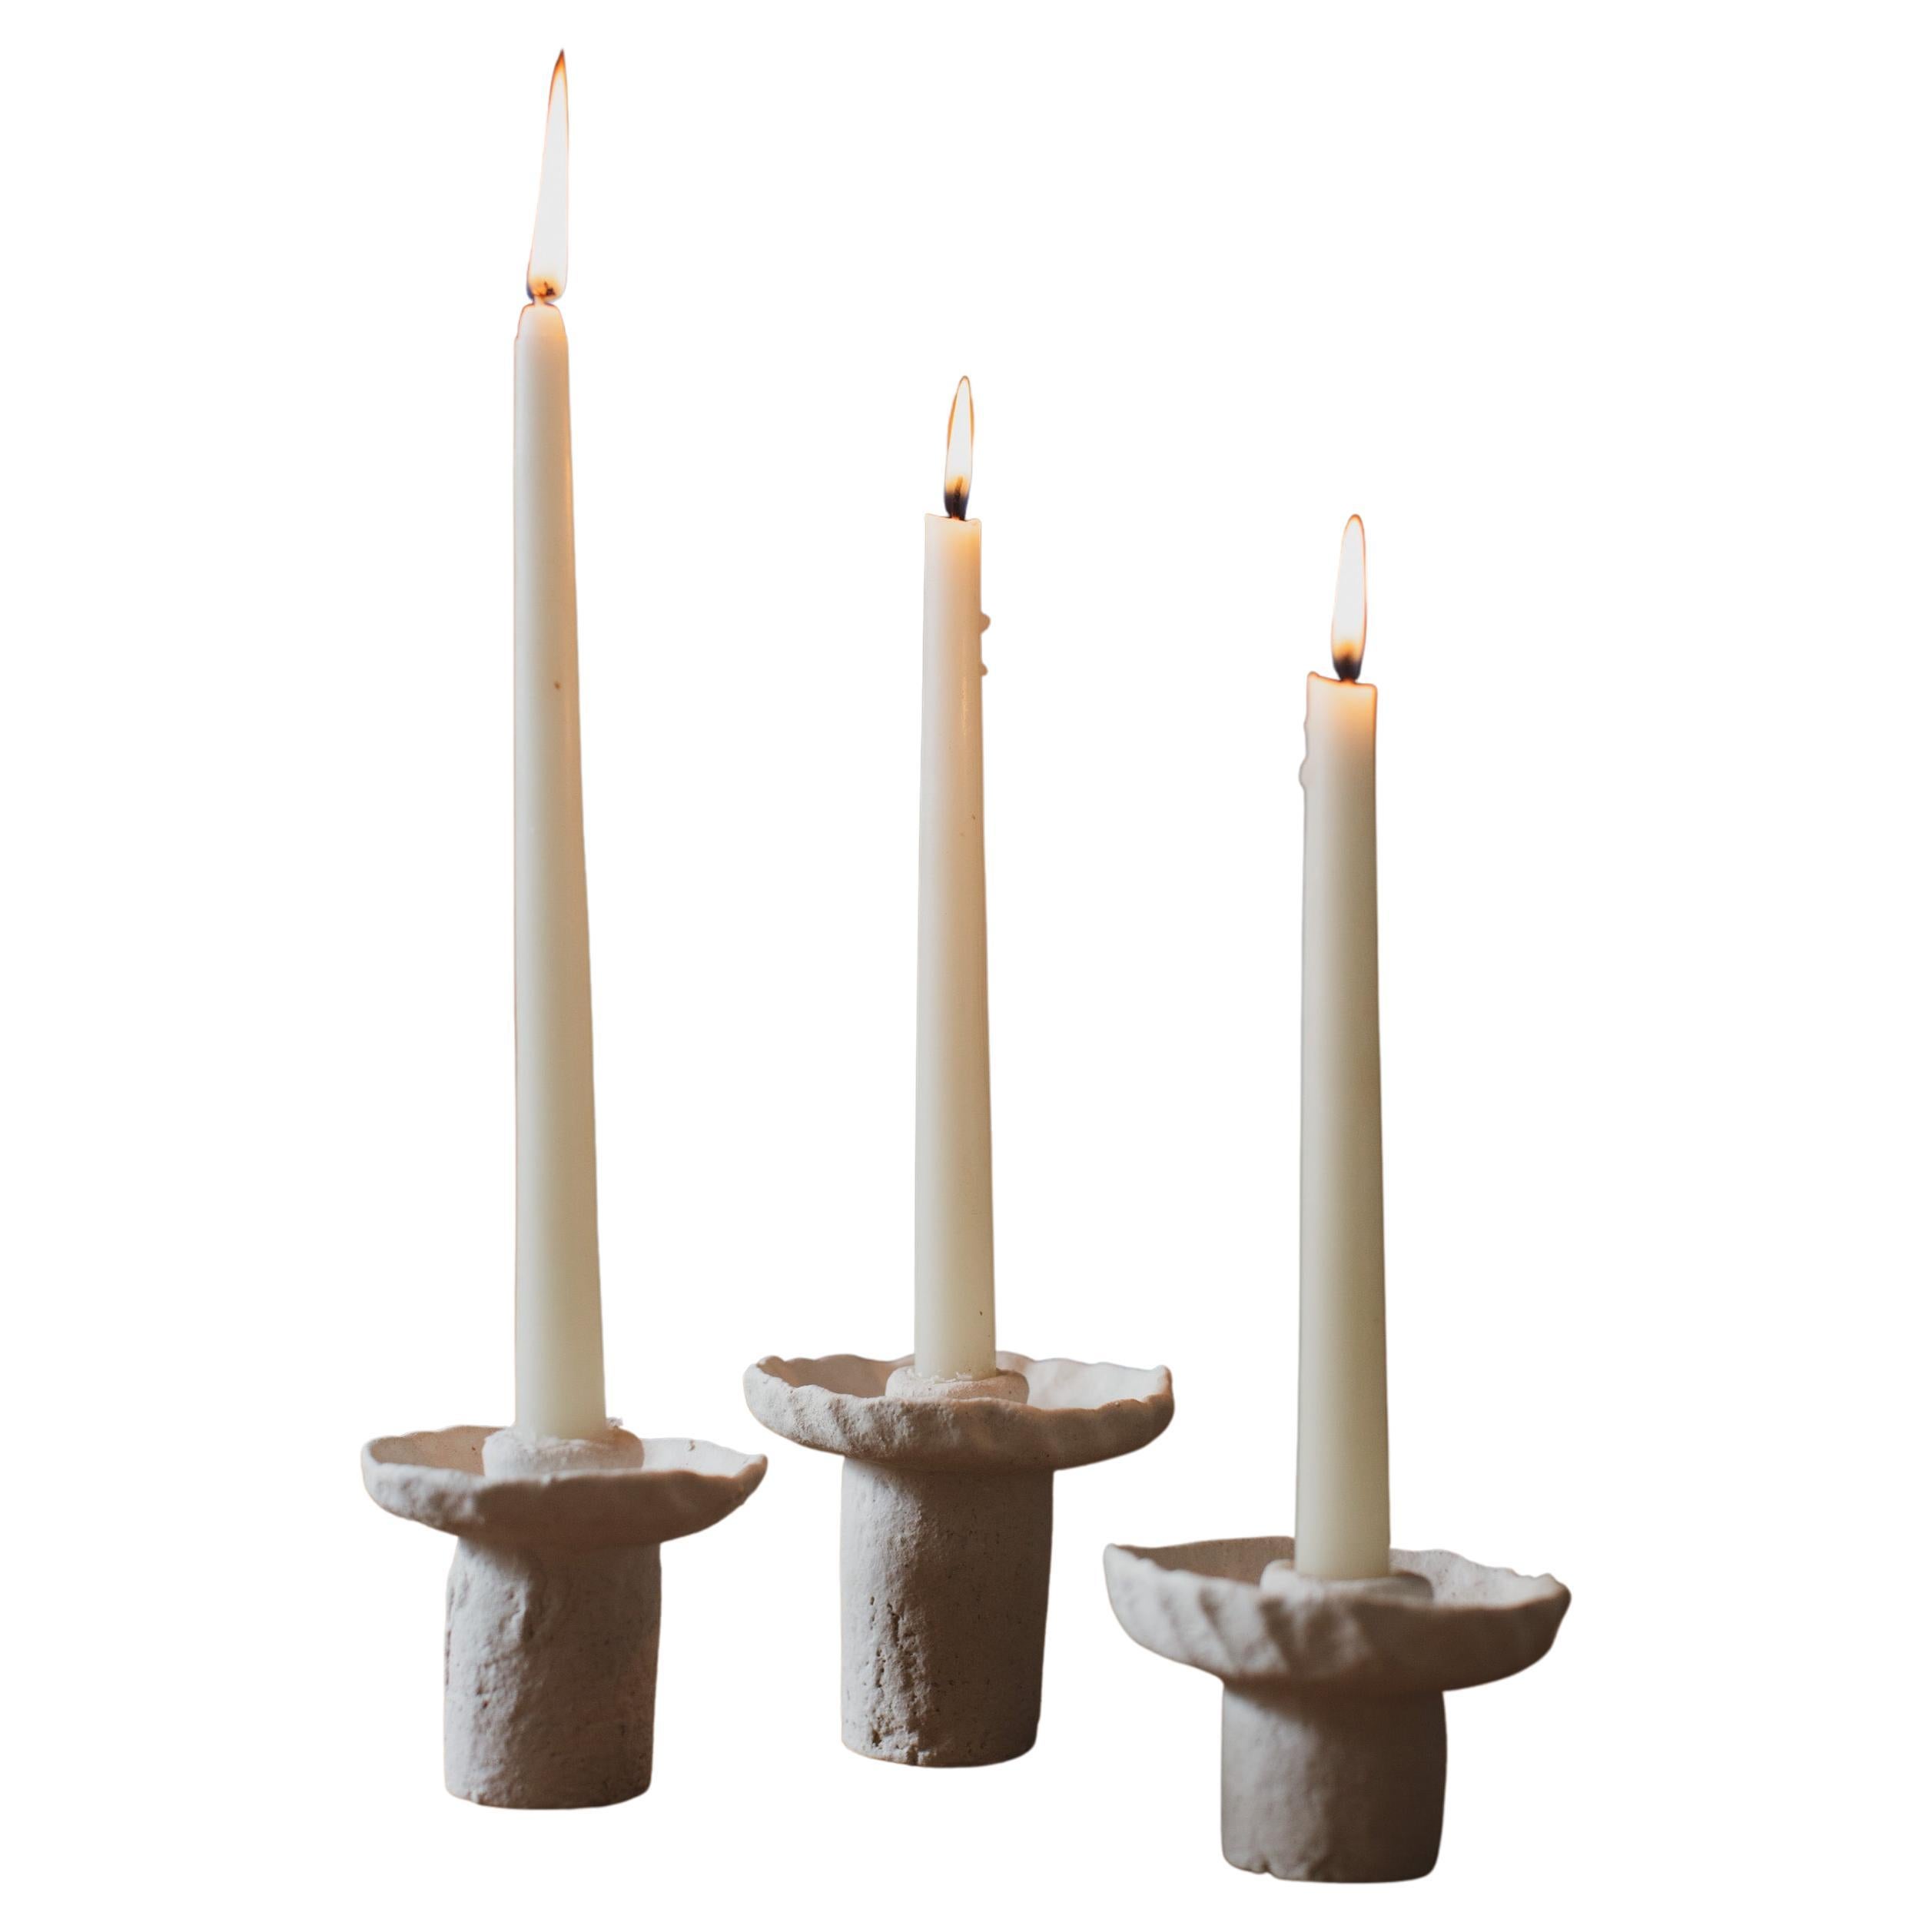 Handmade Ceramic Candlestick Holders by Mugly, NYC